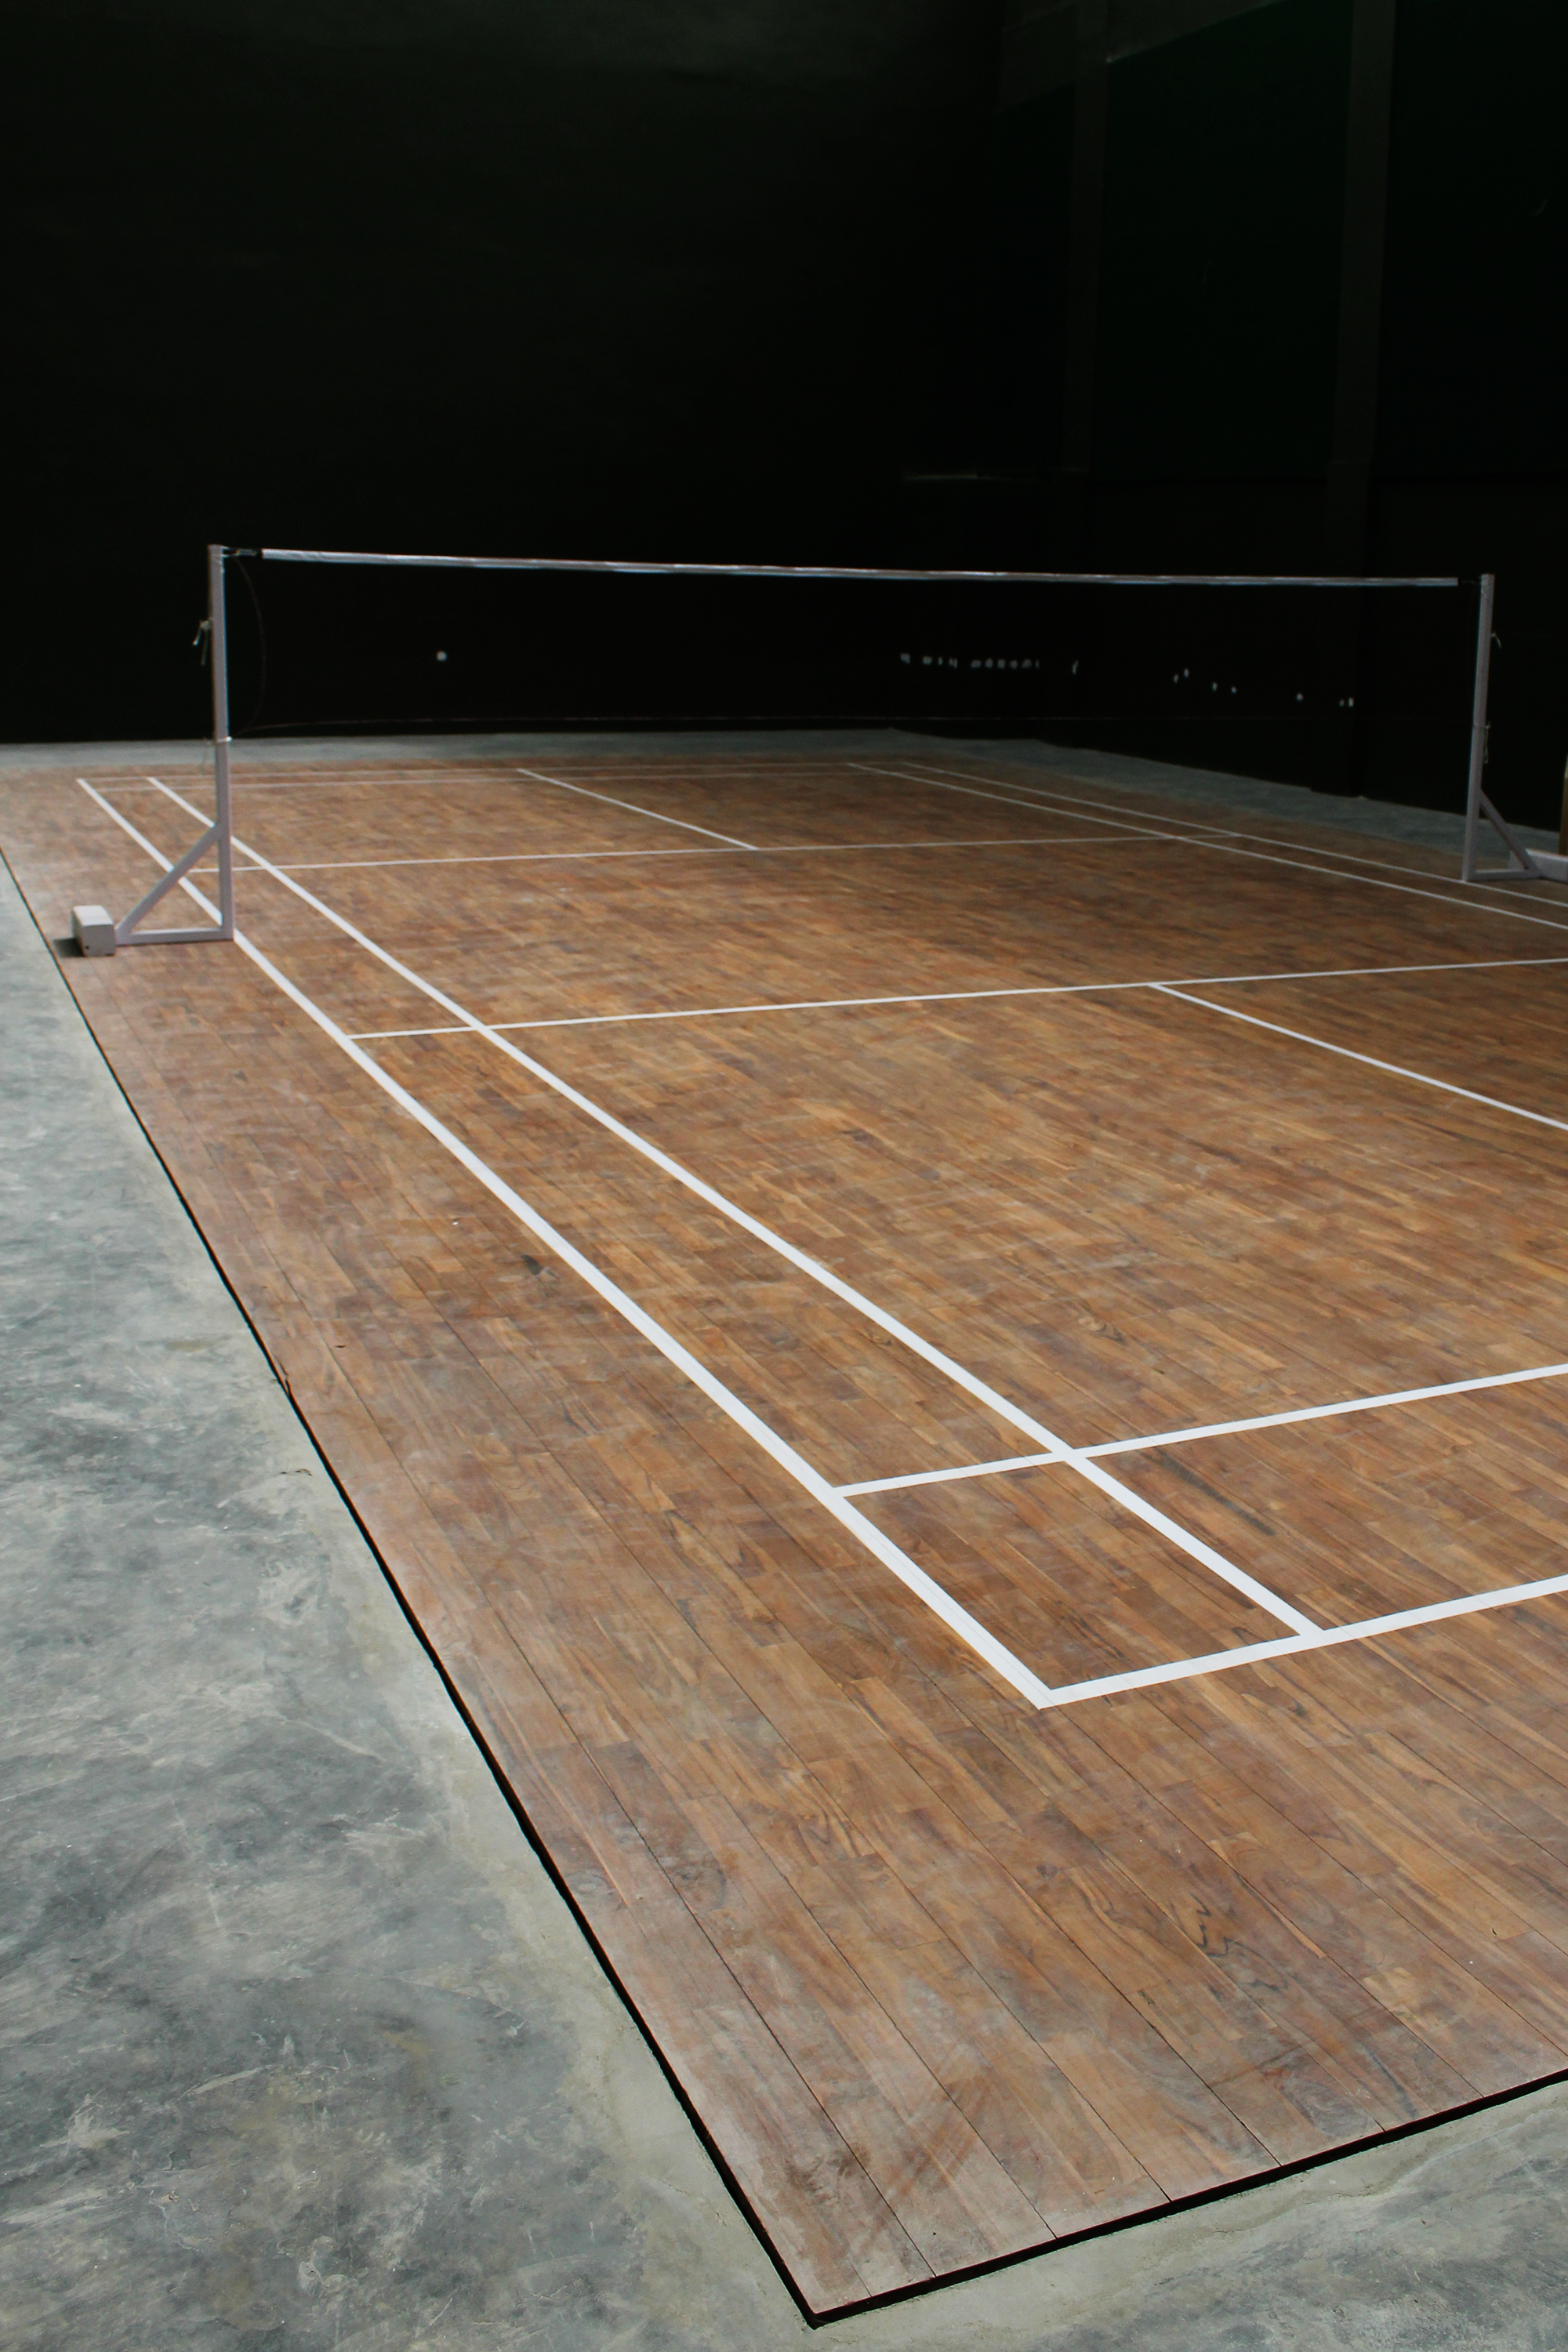 Wood Surface Badminton Court   Download Links Free Images and Photos